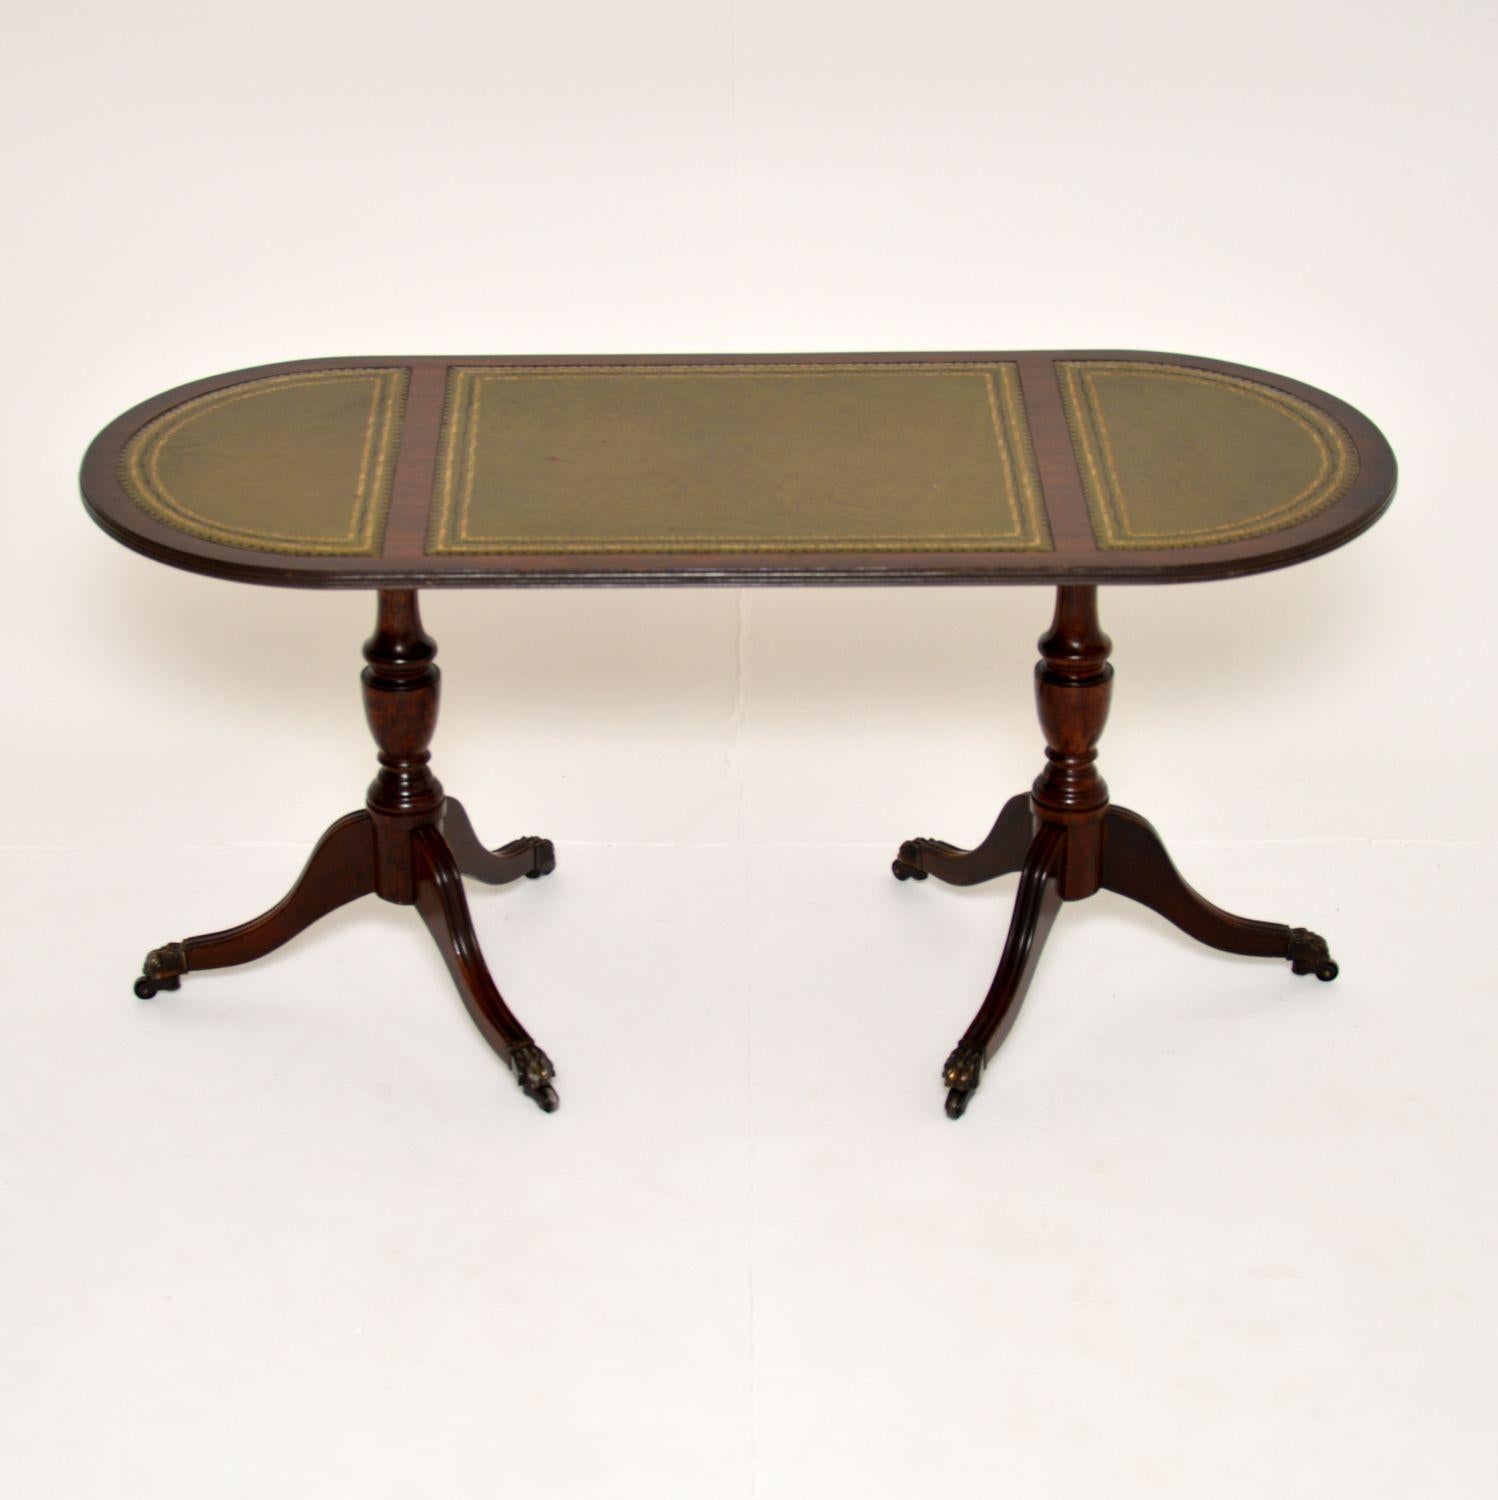 A beautiful and elegant antique Regency style coffee table in wood. This was made in England, it dates from around the 1950’s.

It has a lovely design, with an oval top and two splayed tripod bases. There is a three section gold tooled leather